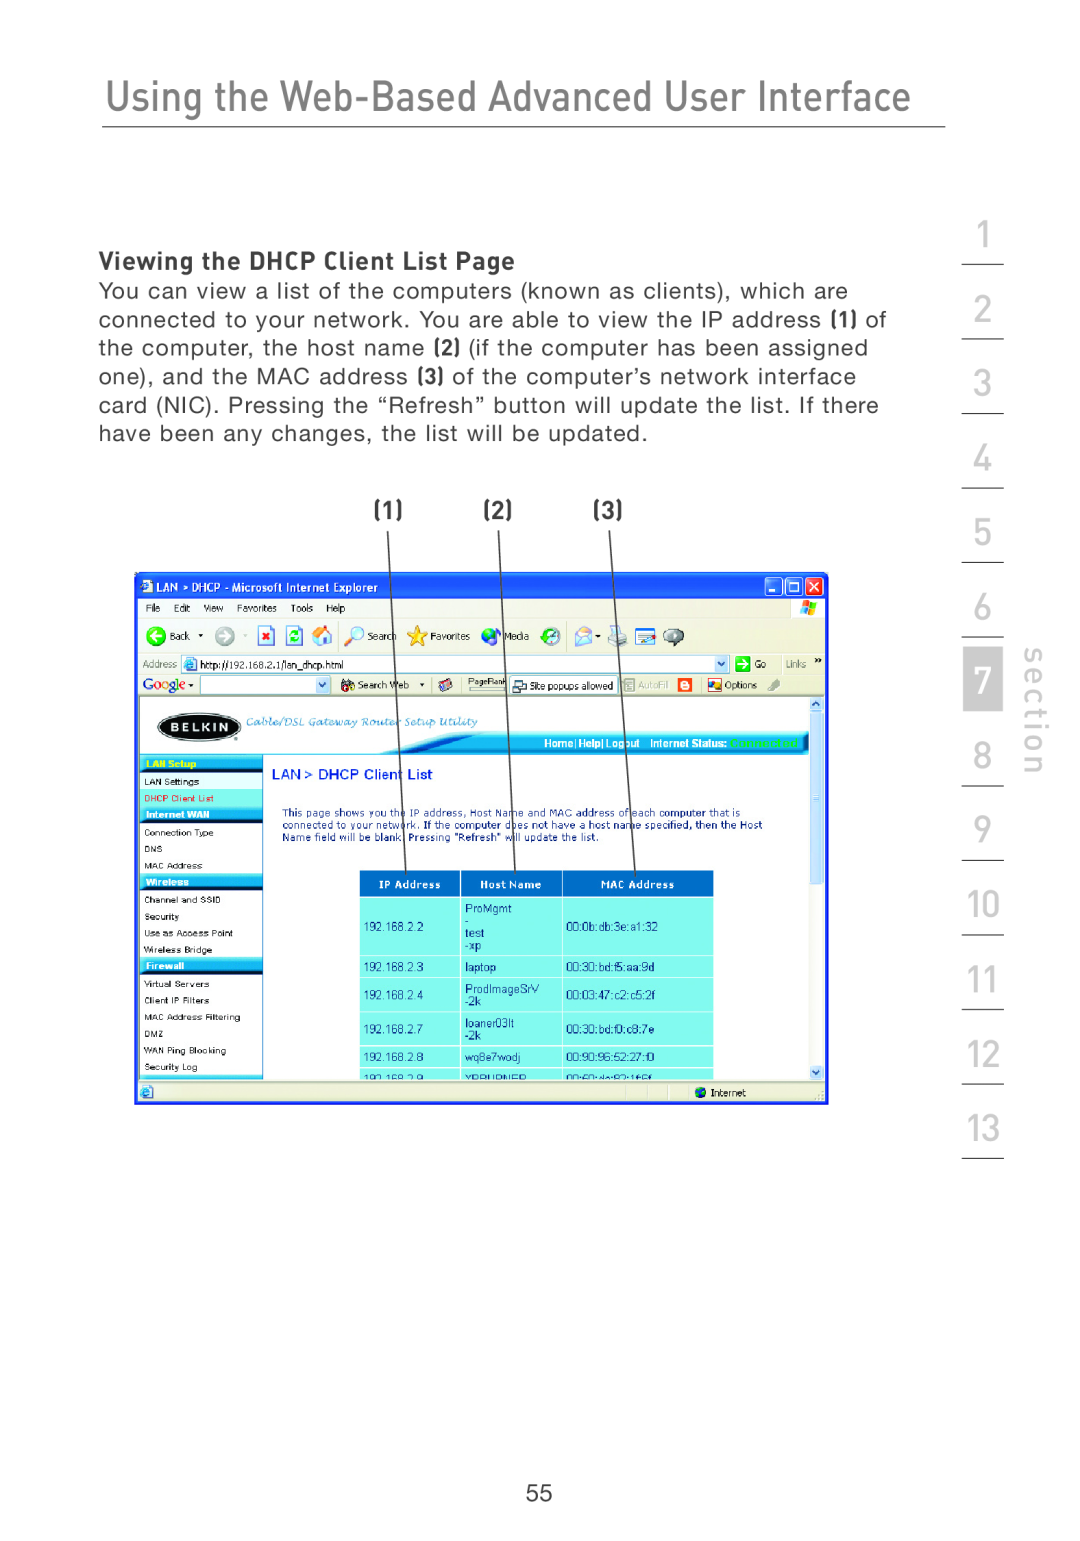 Belkin F5D7231-4P user manual Using the Web-Based Advanced User Interface, Viewing the DHCP Client List Page, section 